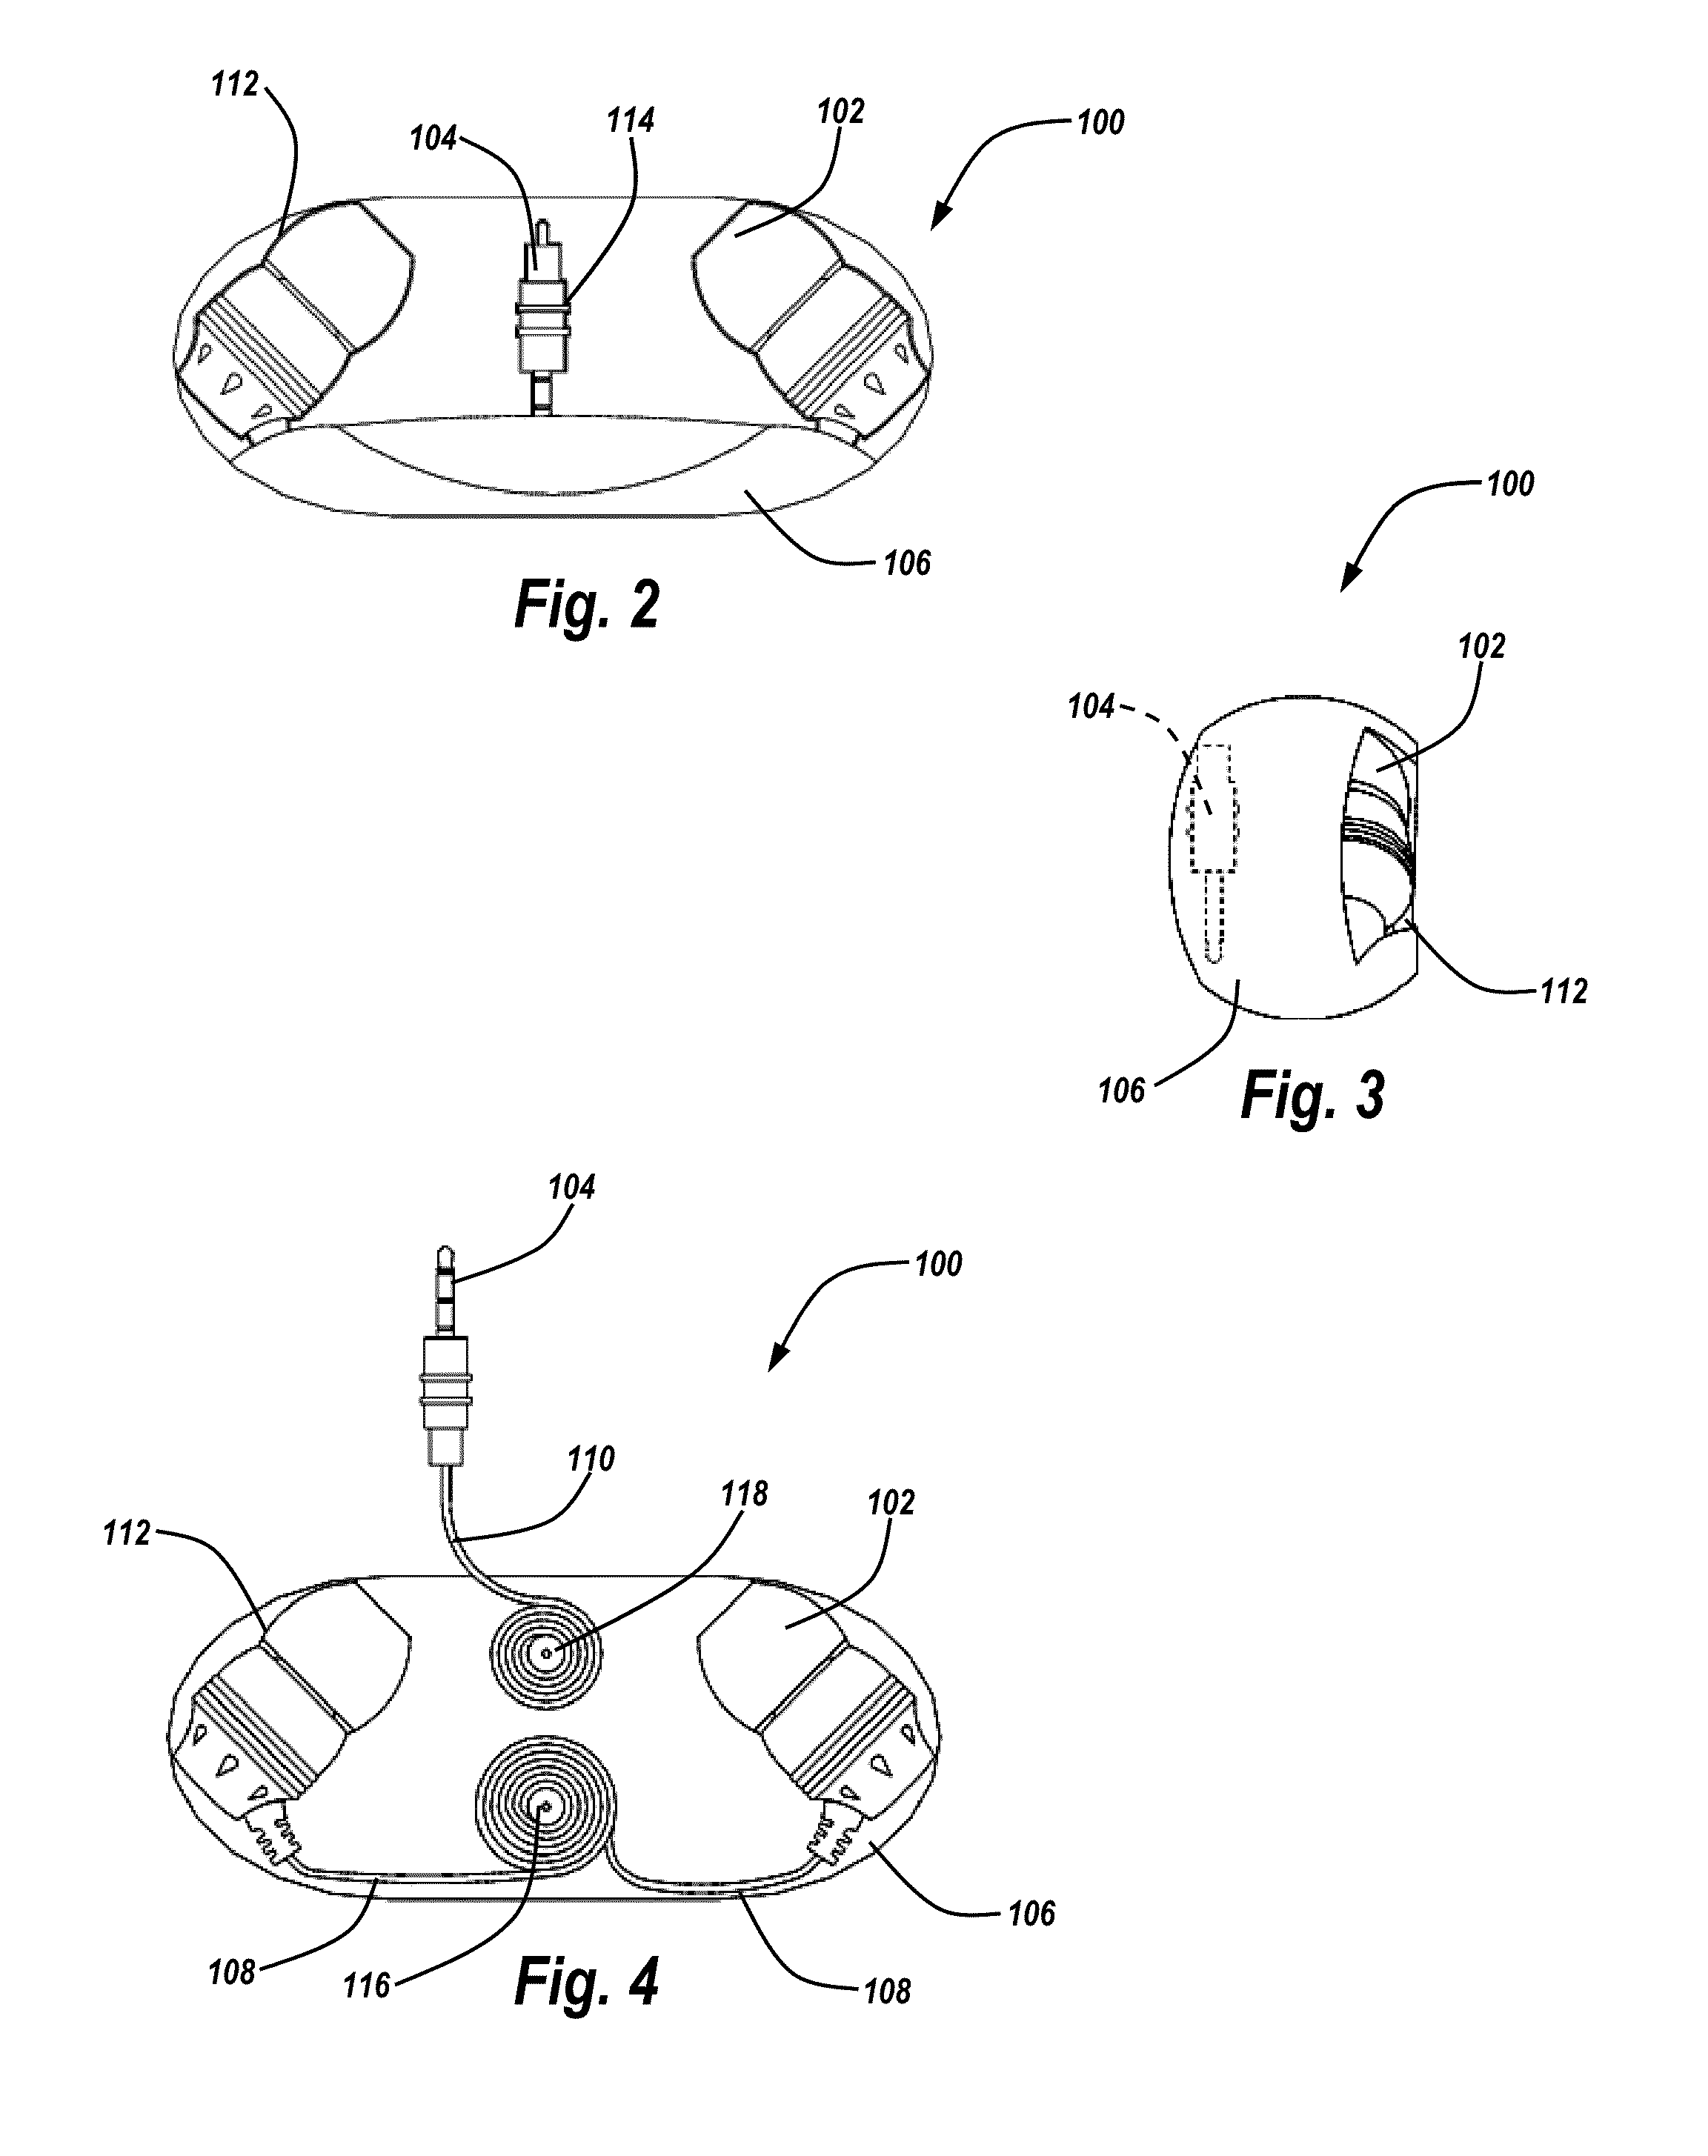 Audio docking devices and systems